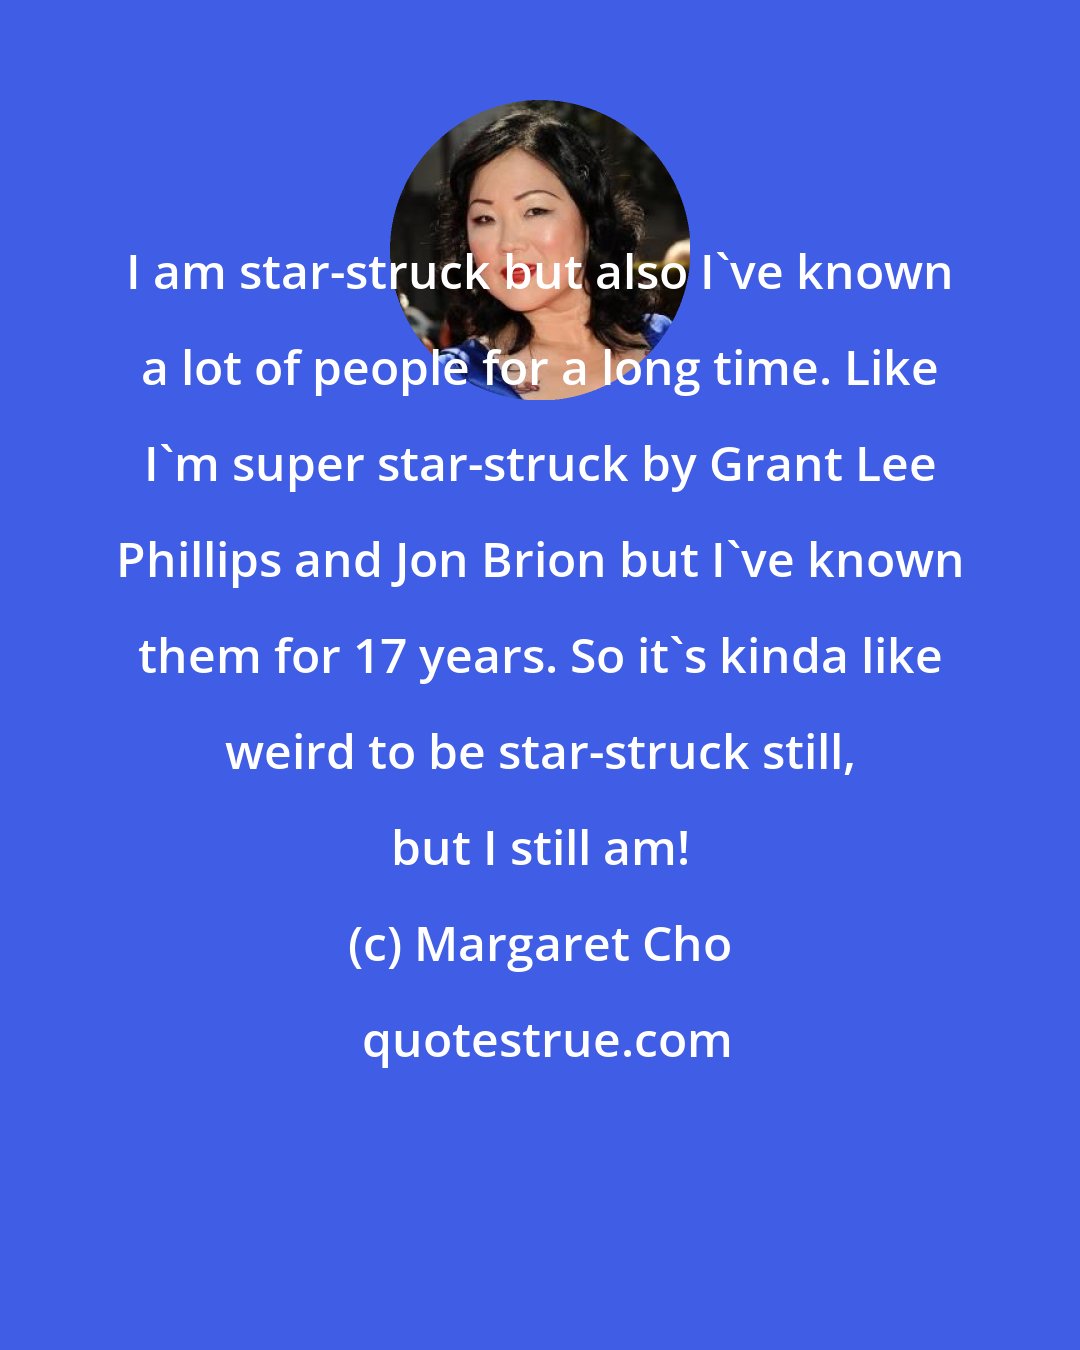 Margaret Cho: I am star-struck but also I've known a lot of people for a long time. Like I'm super star-struck by Grant Lee Phillips and Jon Brion but I've known them for 17 years. So it's kinda like weird to be star-struck still, but I still am!